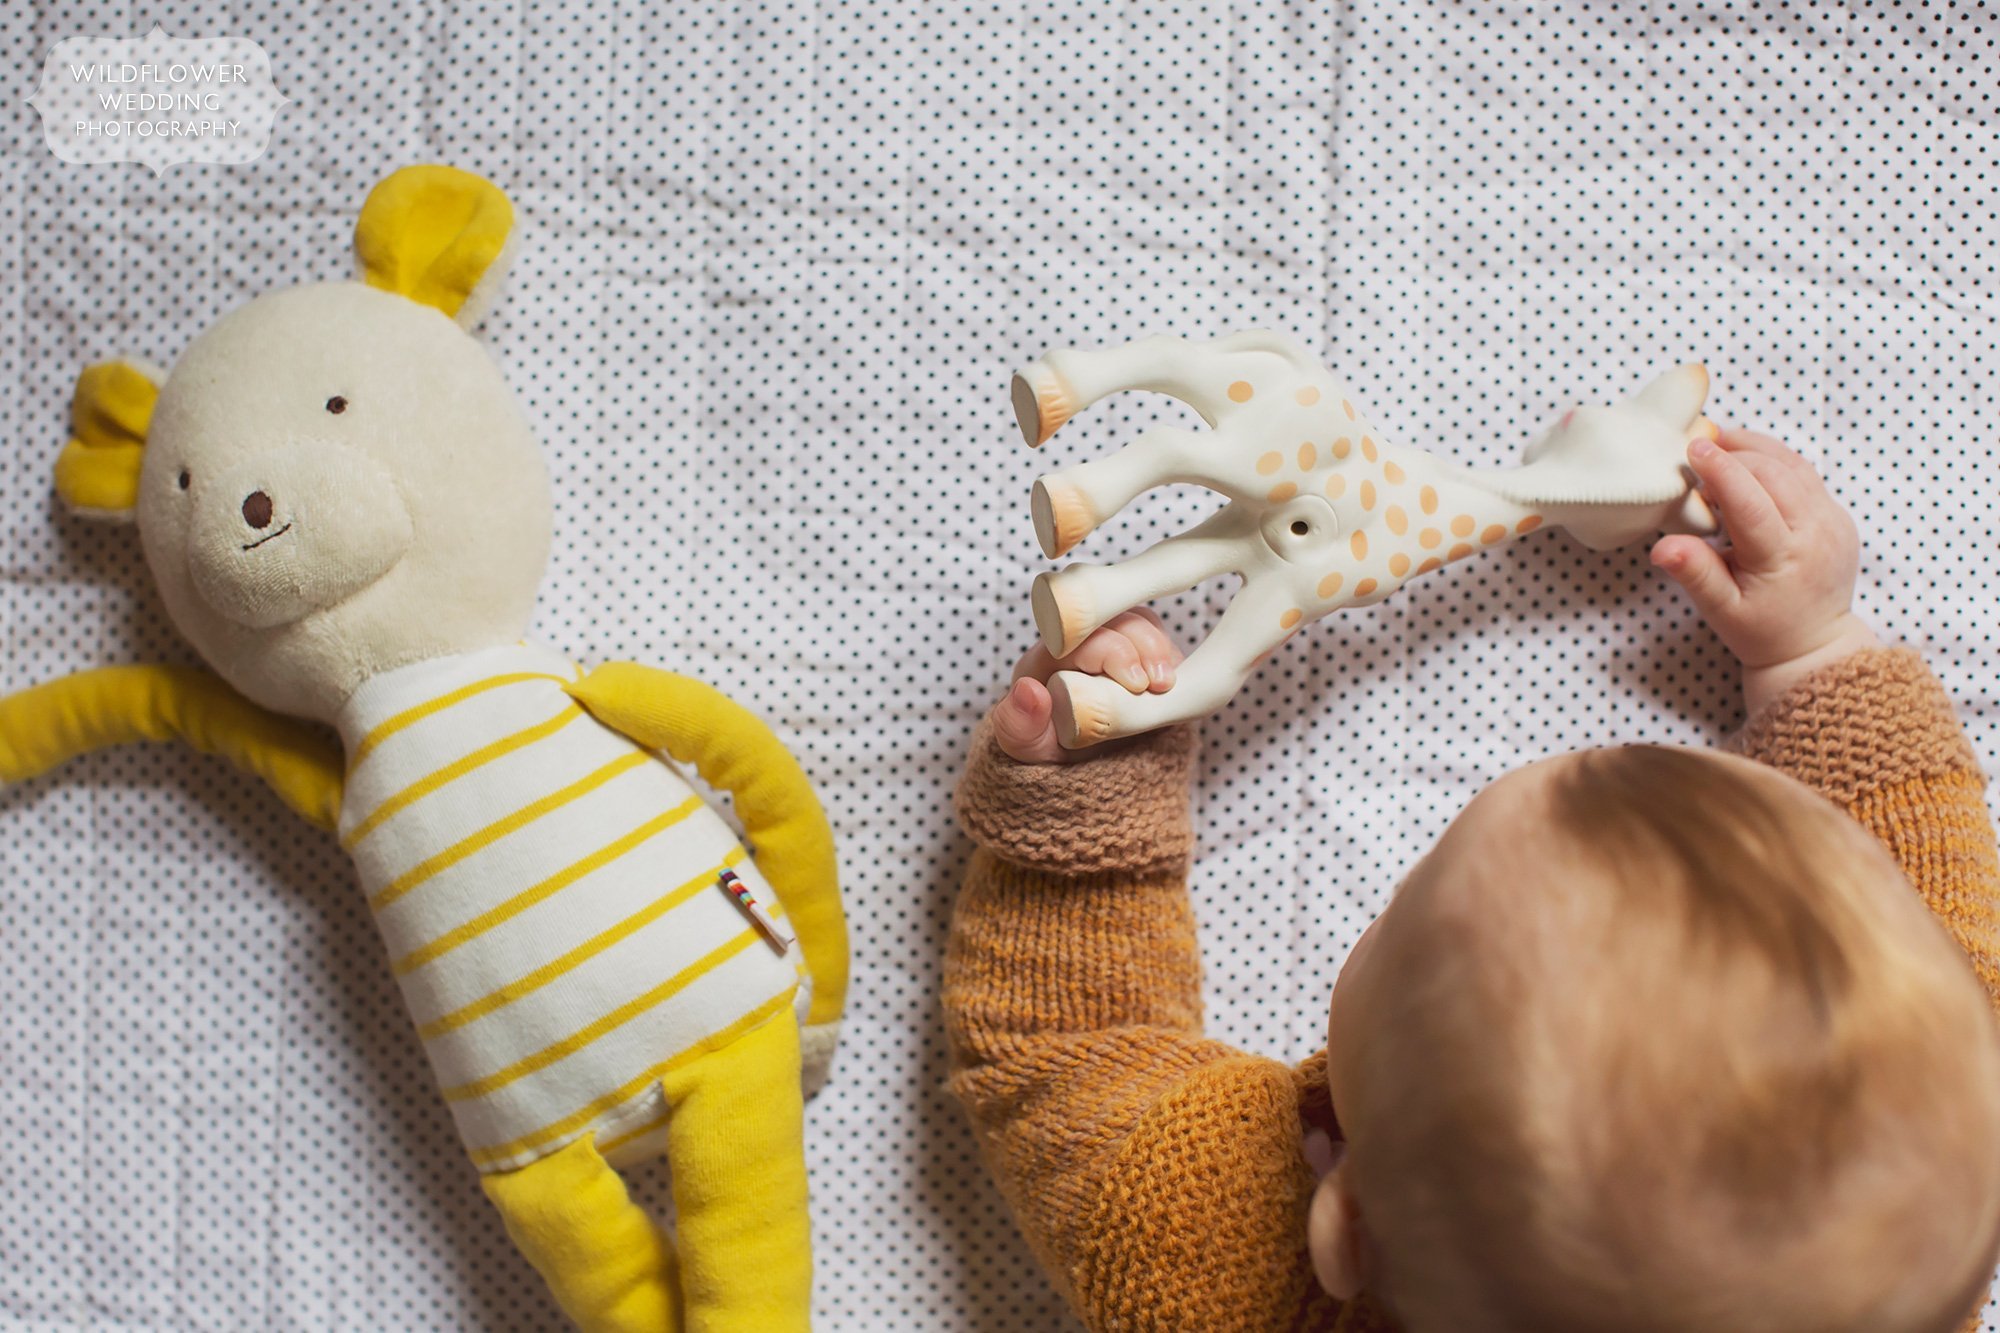 Close up photo of baby's hands holding Sophie the giraffe during an at home documentary shoot.